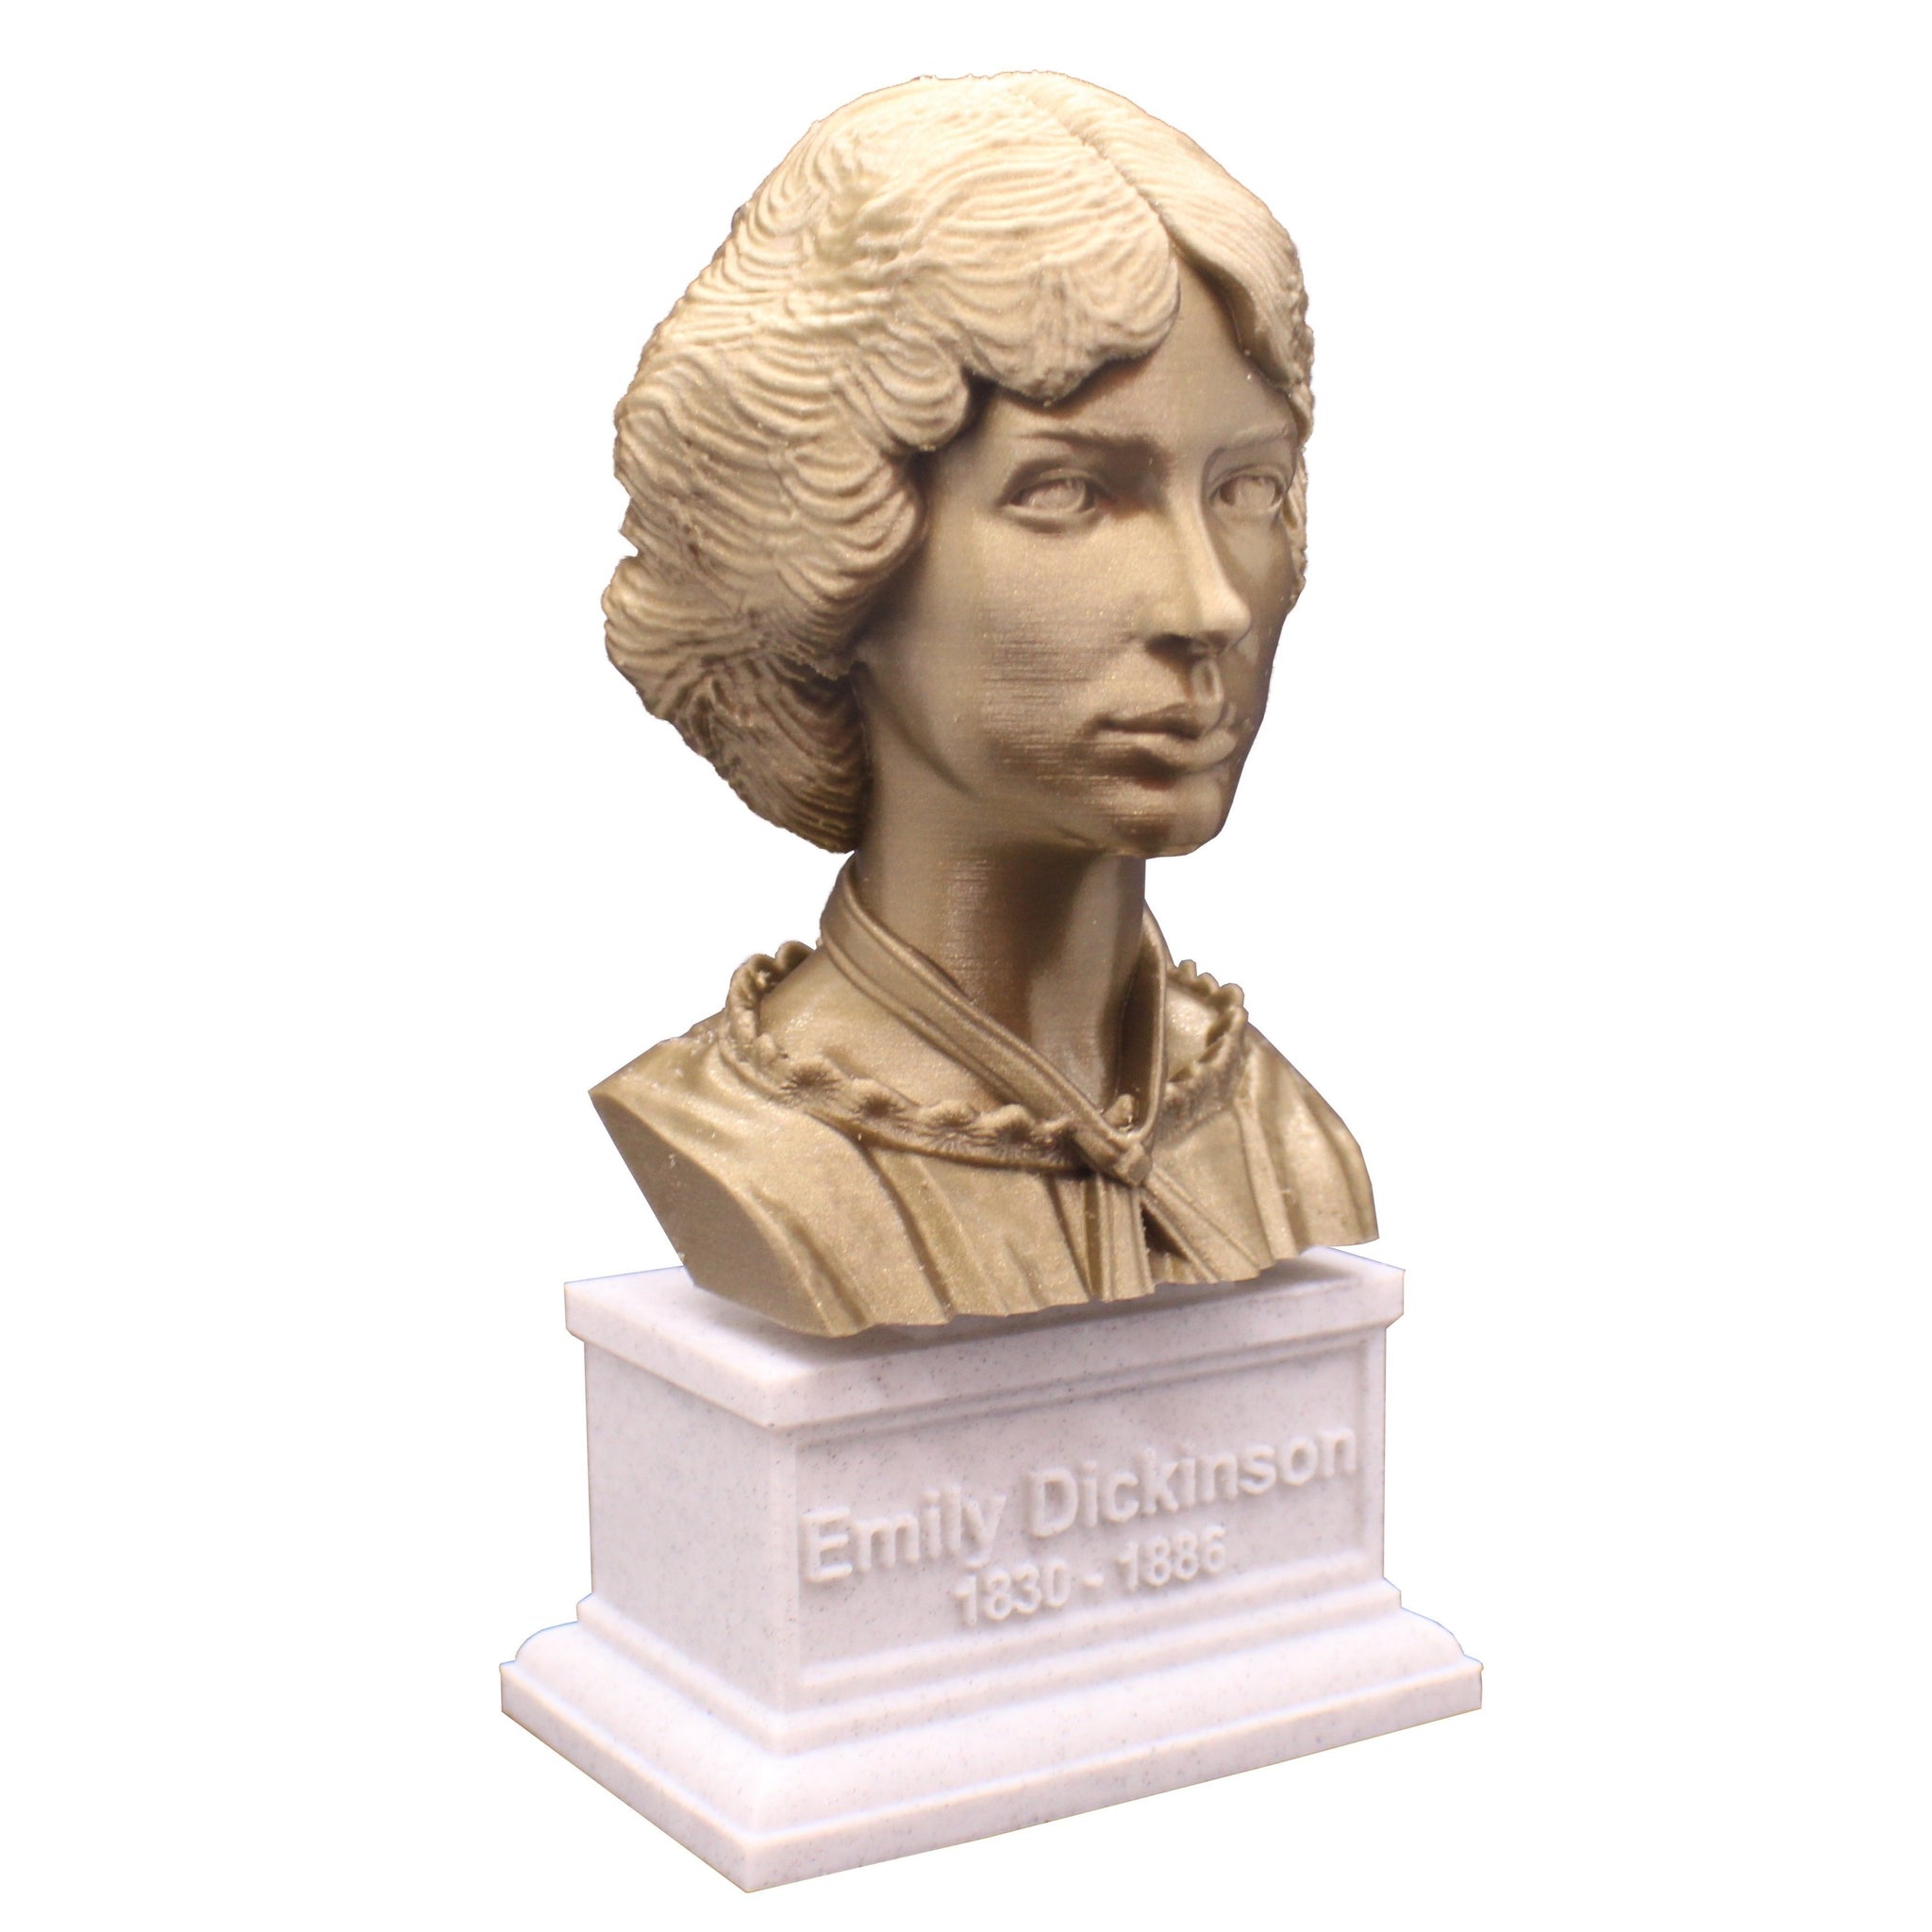 Emily Dickinson, Famous American Poet, Sculpture Bust on Box Plinth